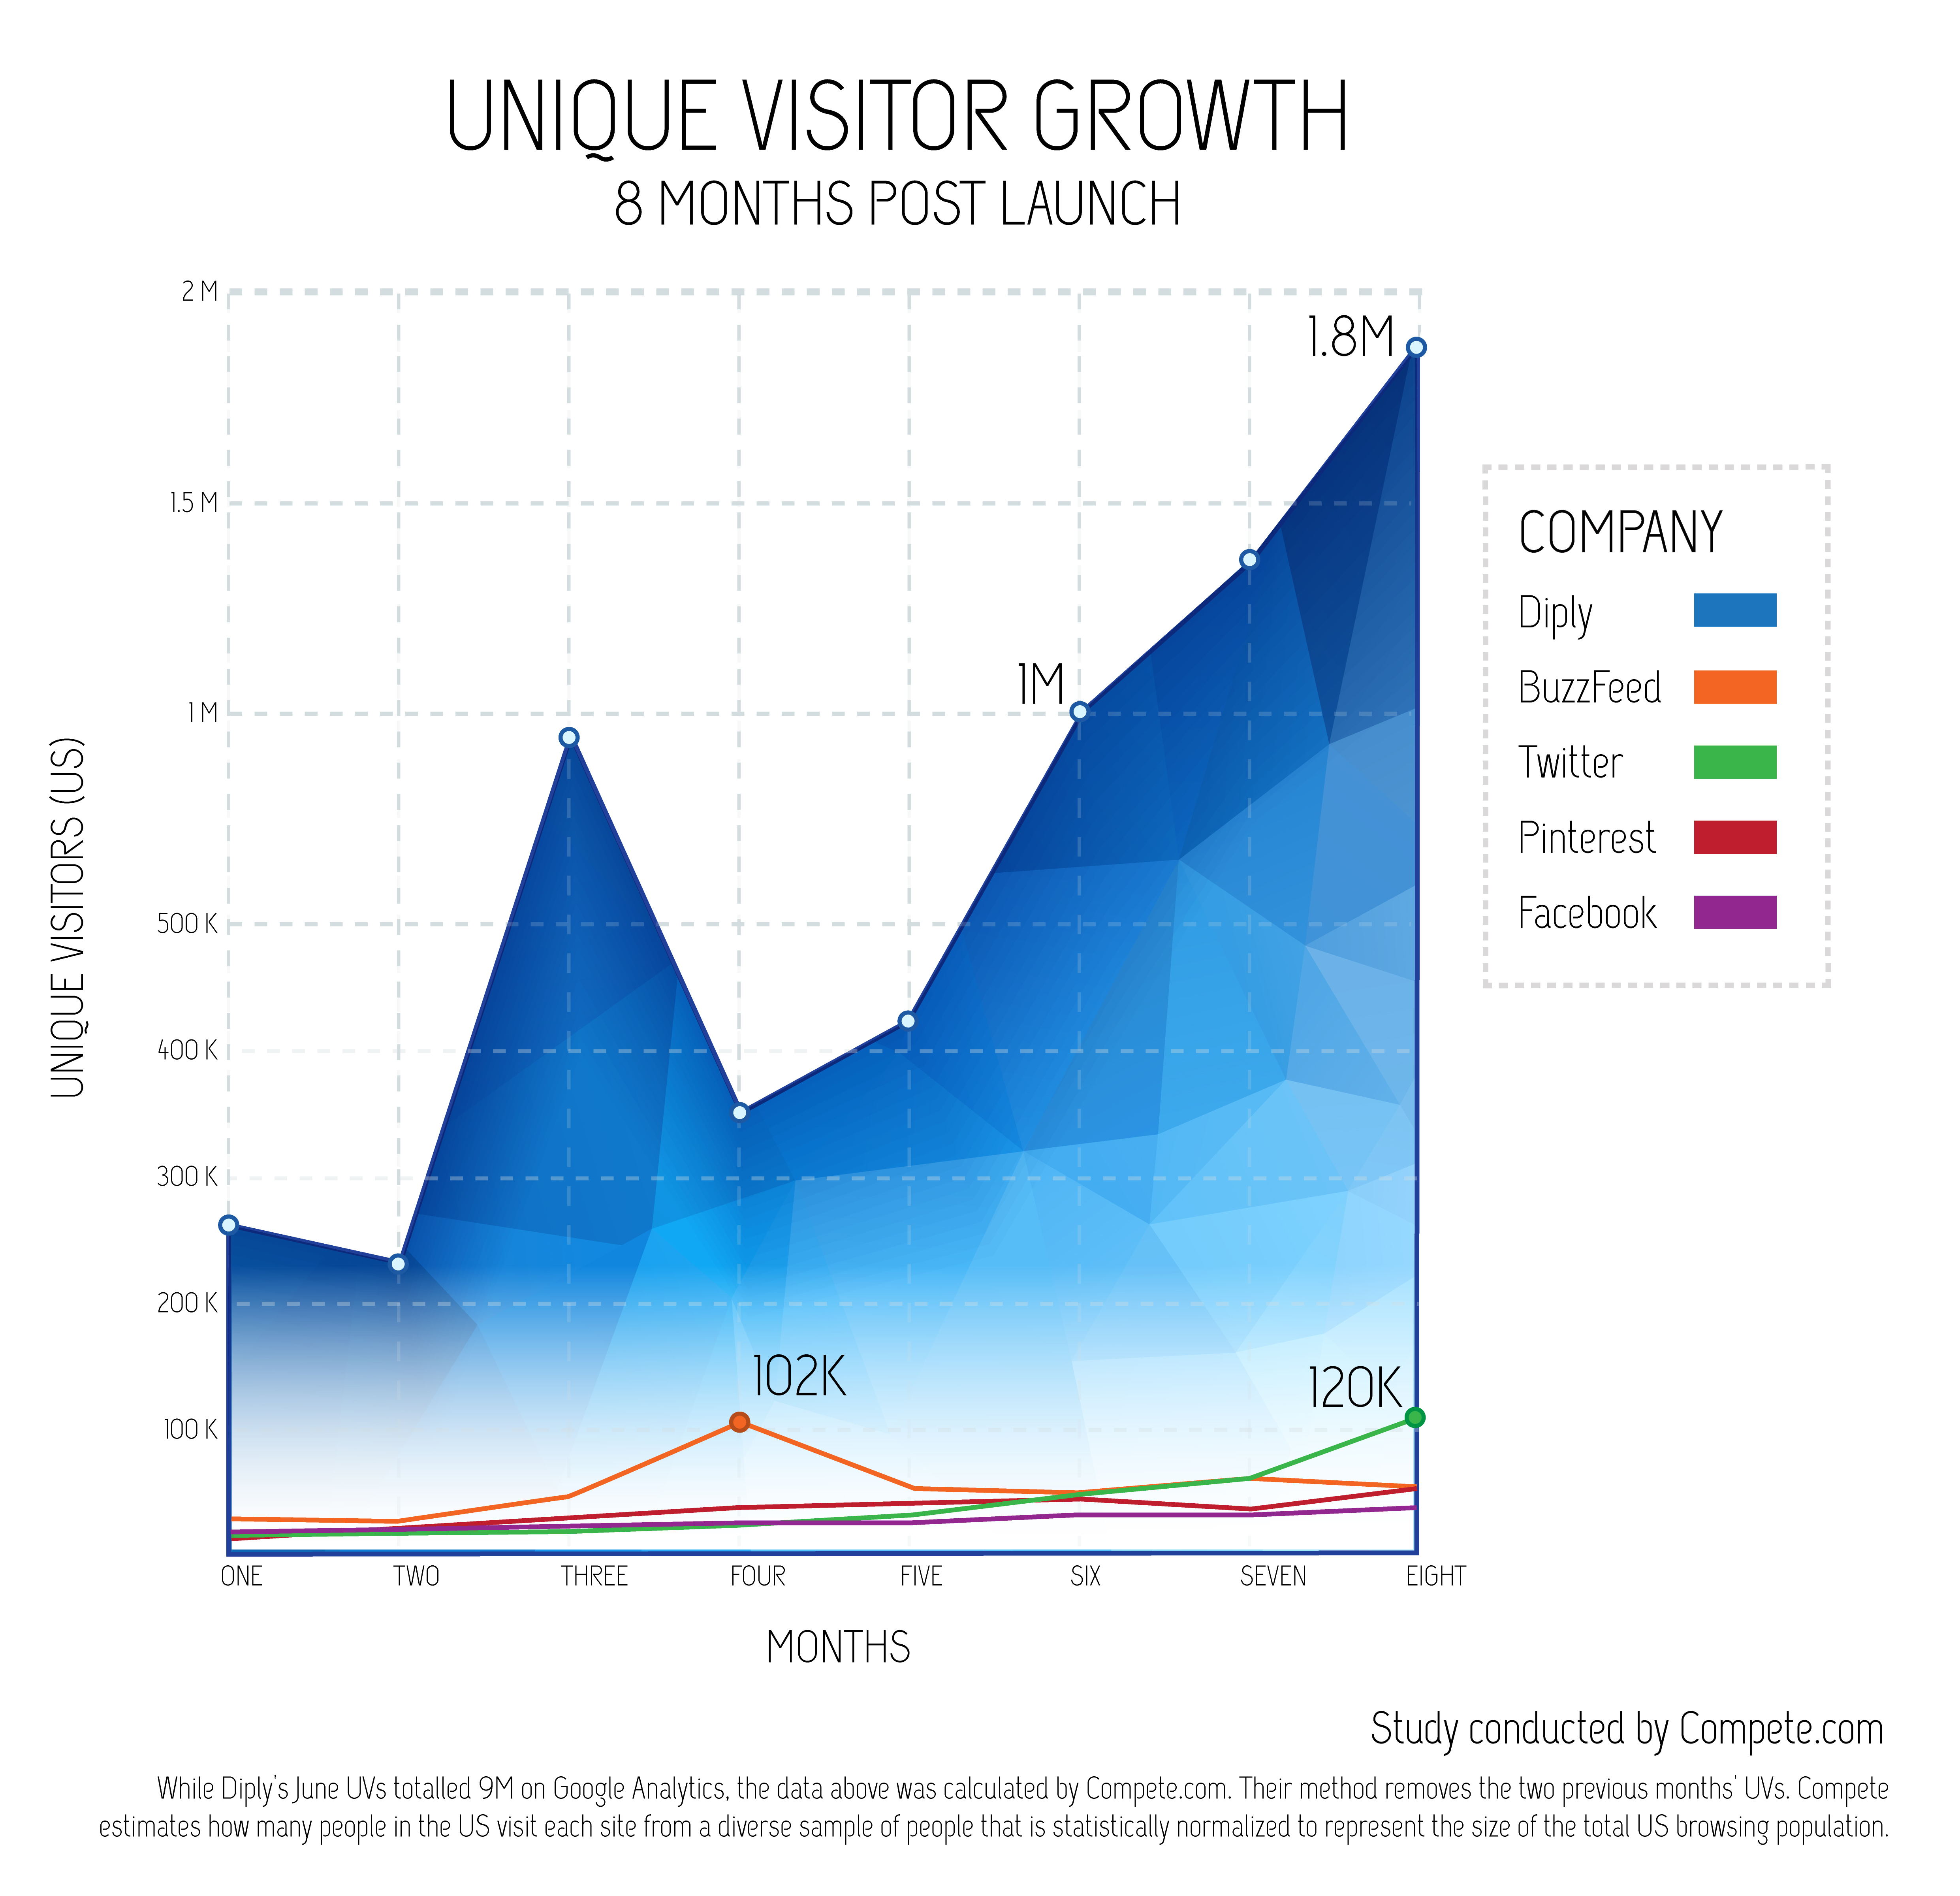 Unique Visitor Growth (US) 8 Months Post Launch